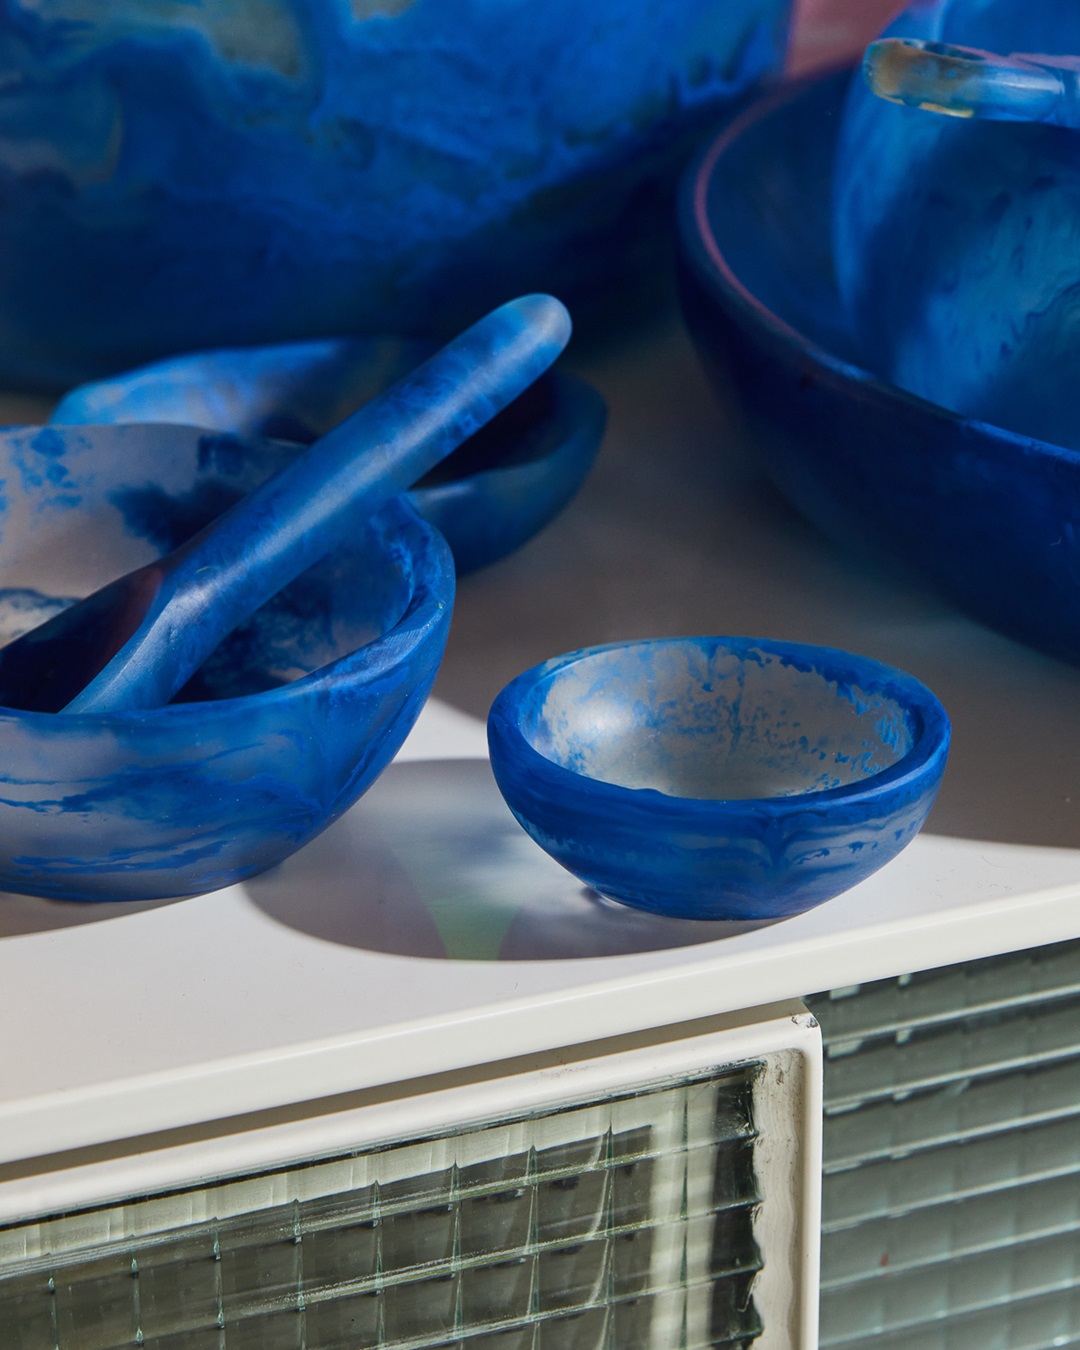 Blue bowls on a table